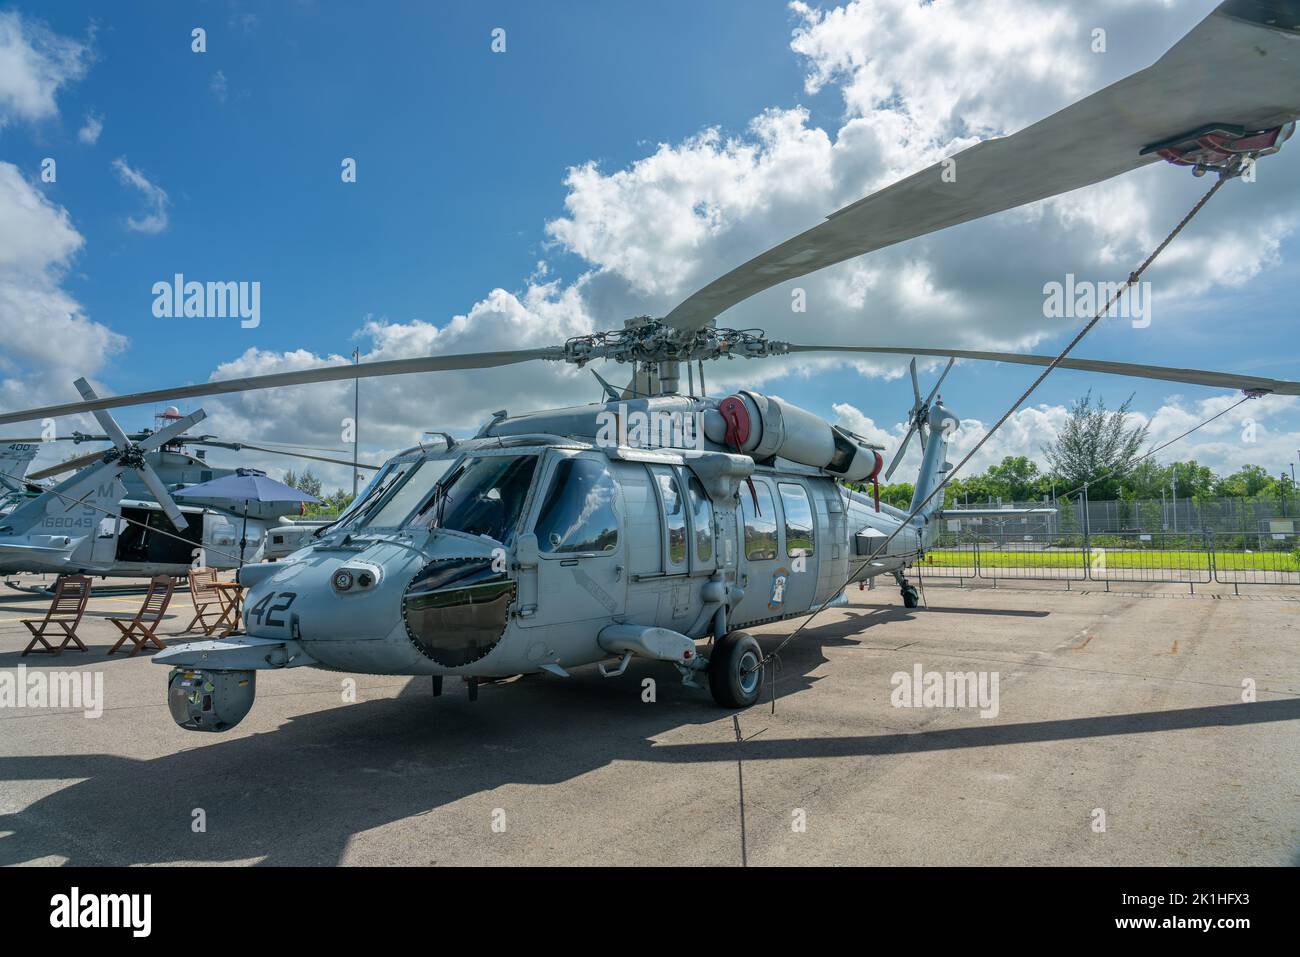 A parked Sikorsky SH-60 Seahawk transport Helicopter used by the Marines on the ground Stock Photo